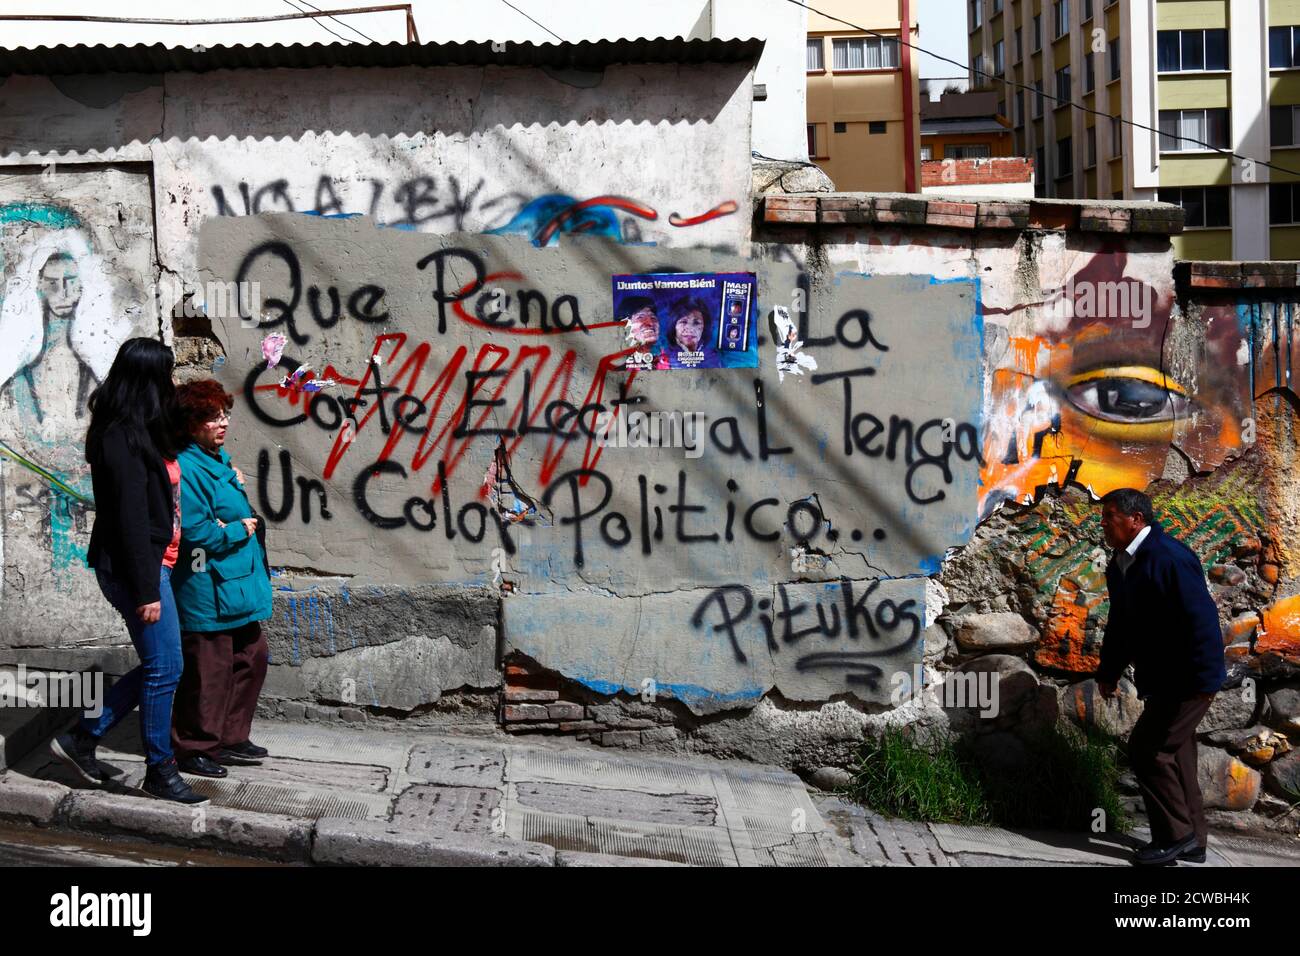 La Paz, Bolivia, 5th January 2015. Graffiti on a wall accusing the Electoral Court of not being impartial Stock Photo